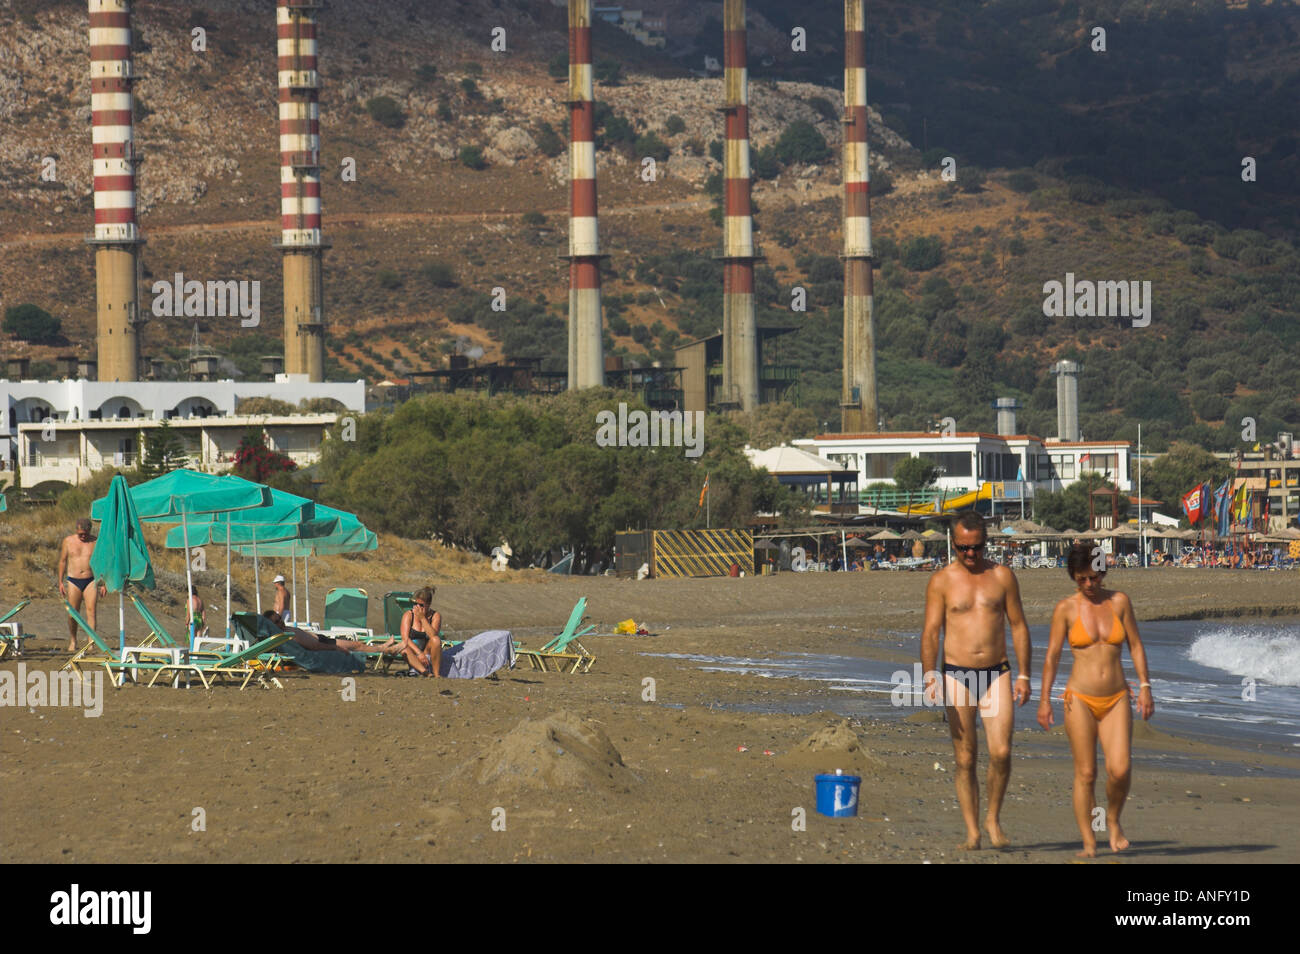 Greece Crete Ammoudara couple walking on the beach with power plant chimneys in bkgd Stock Photo